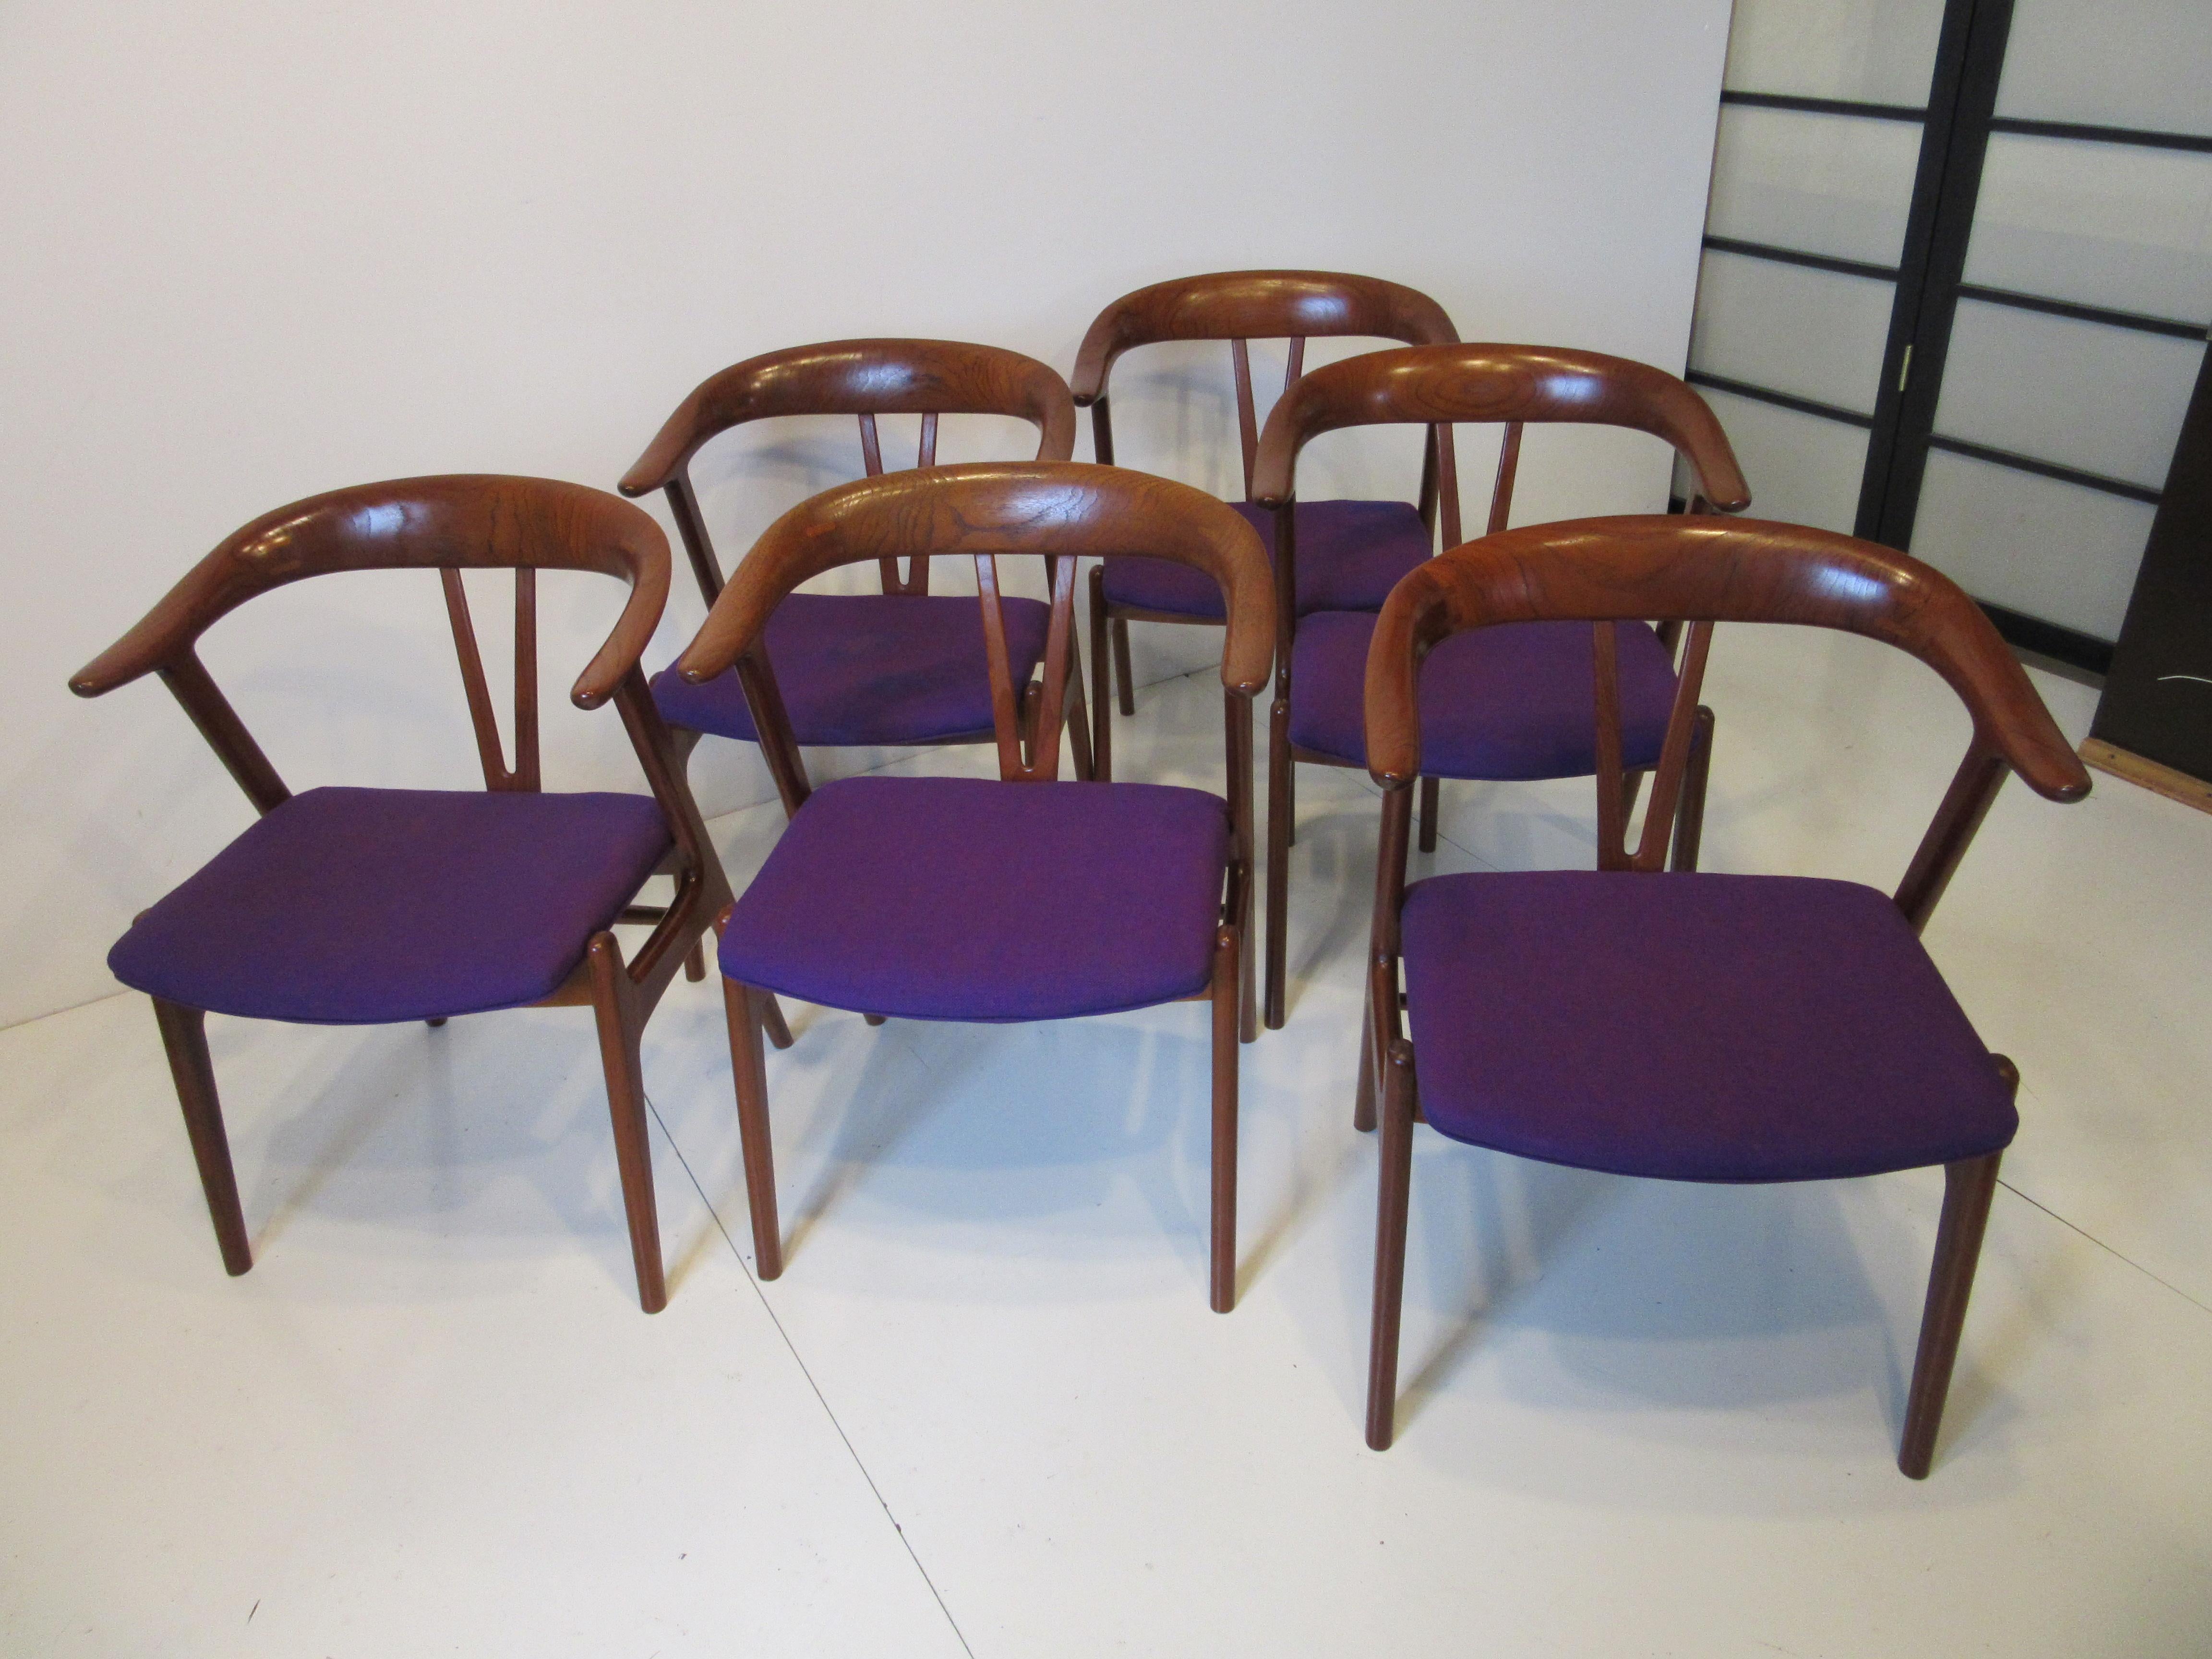 A set of six sculptural walnut dining chairs with bull horn styled back curving into the arm rests having a V shaped spine and great angled legs. The back rests show wonderful ring wood graining with great joinery the seat bottoms are upholstered in